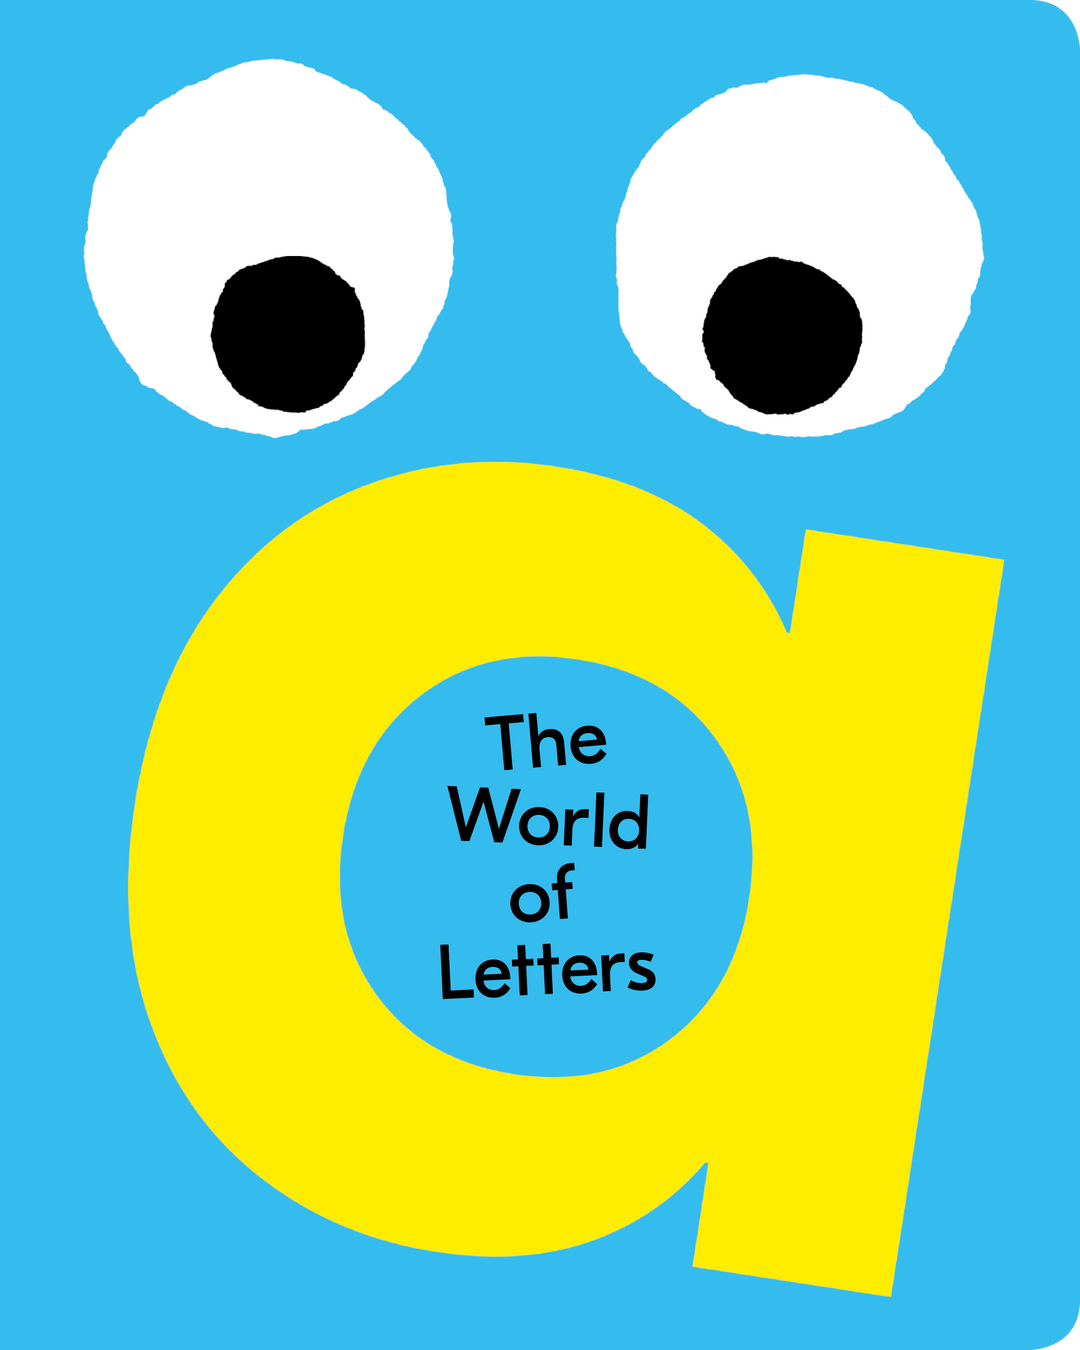 The World of Letters